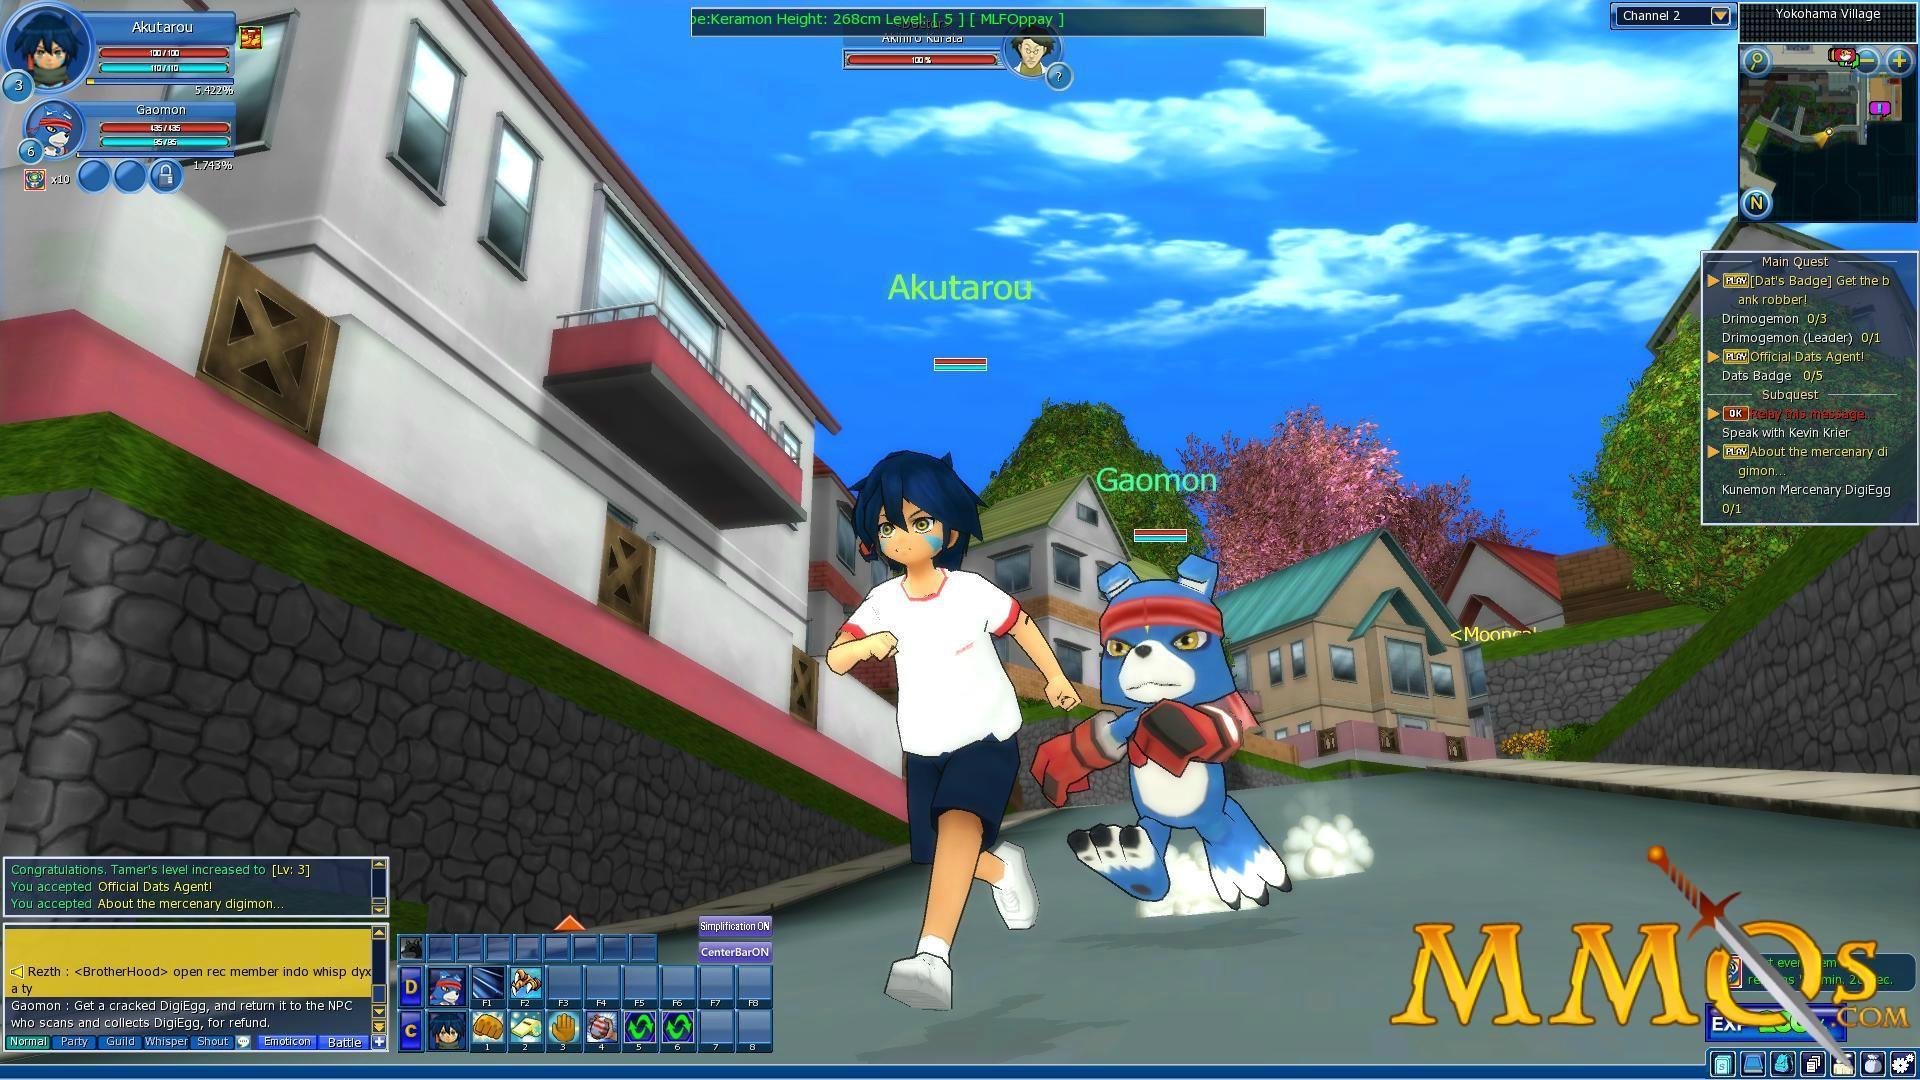 Digimon Masters Online - Download